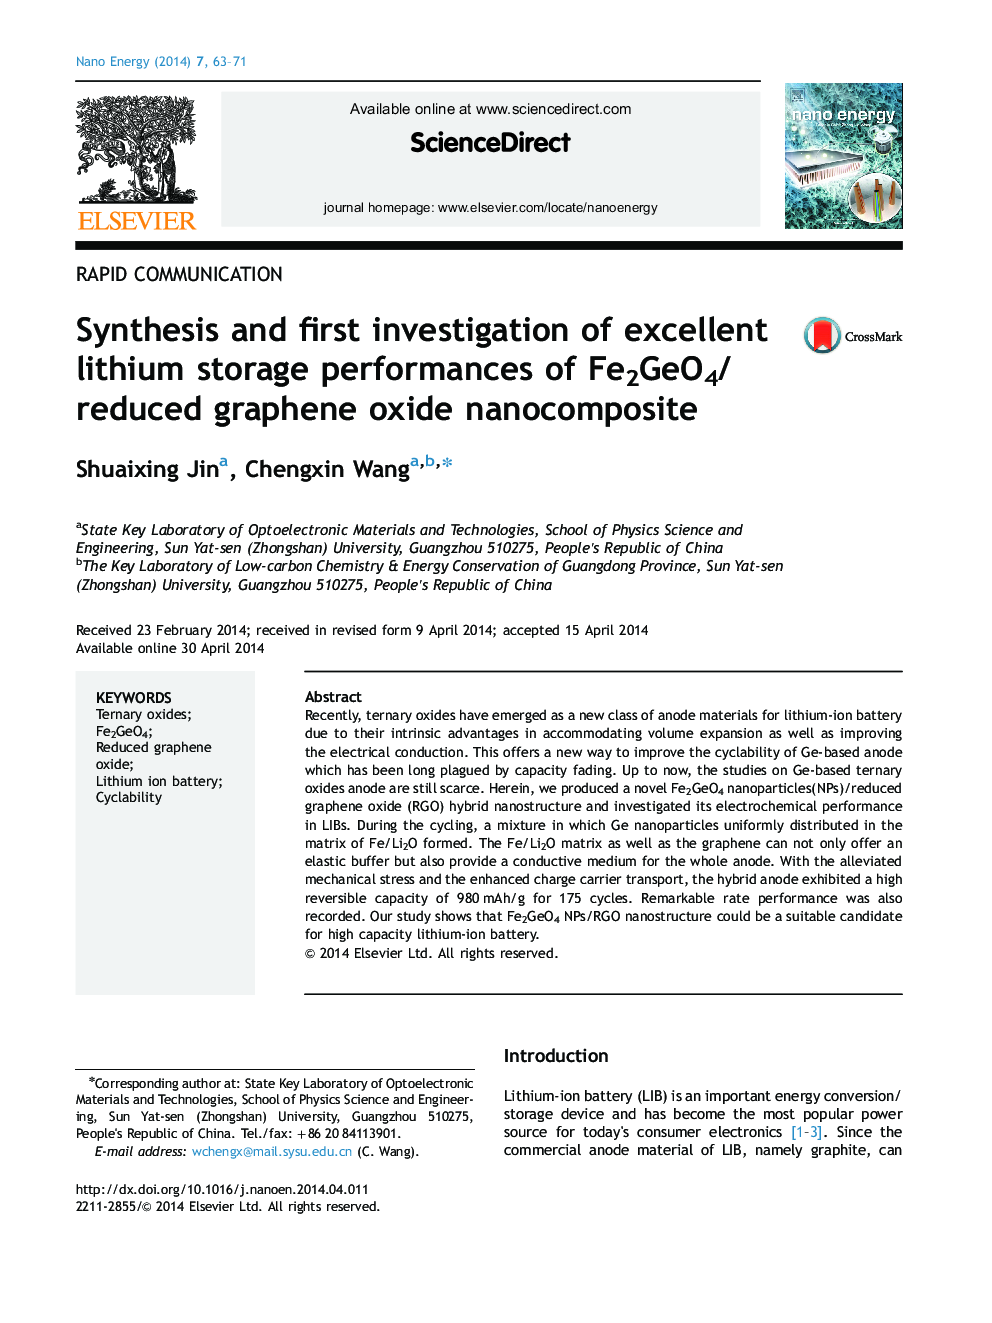 Synthesis and first investigation of excellent lithium storage performances of Fe2GeO4/reduced graphene oxide nanocomposite